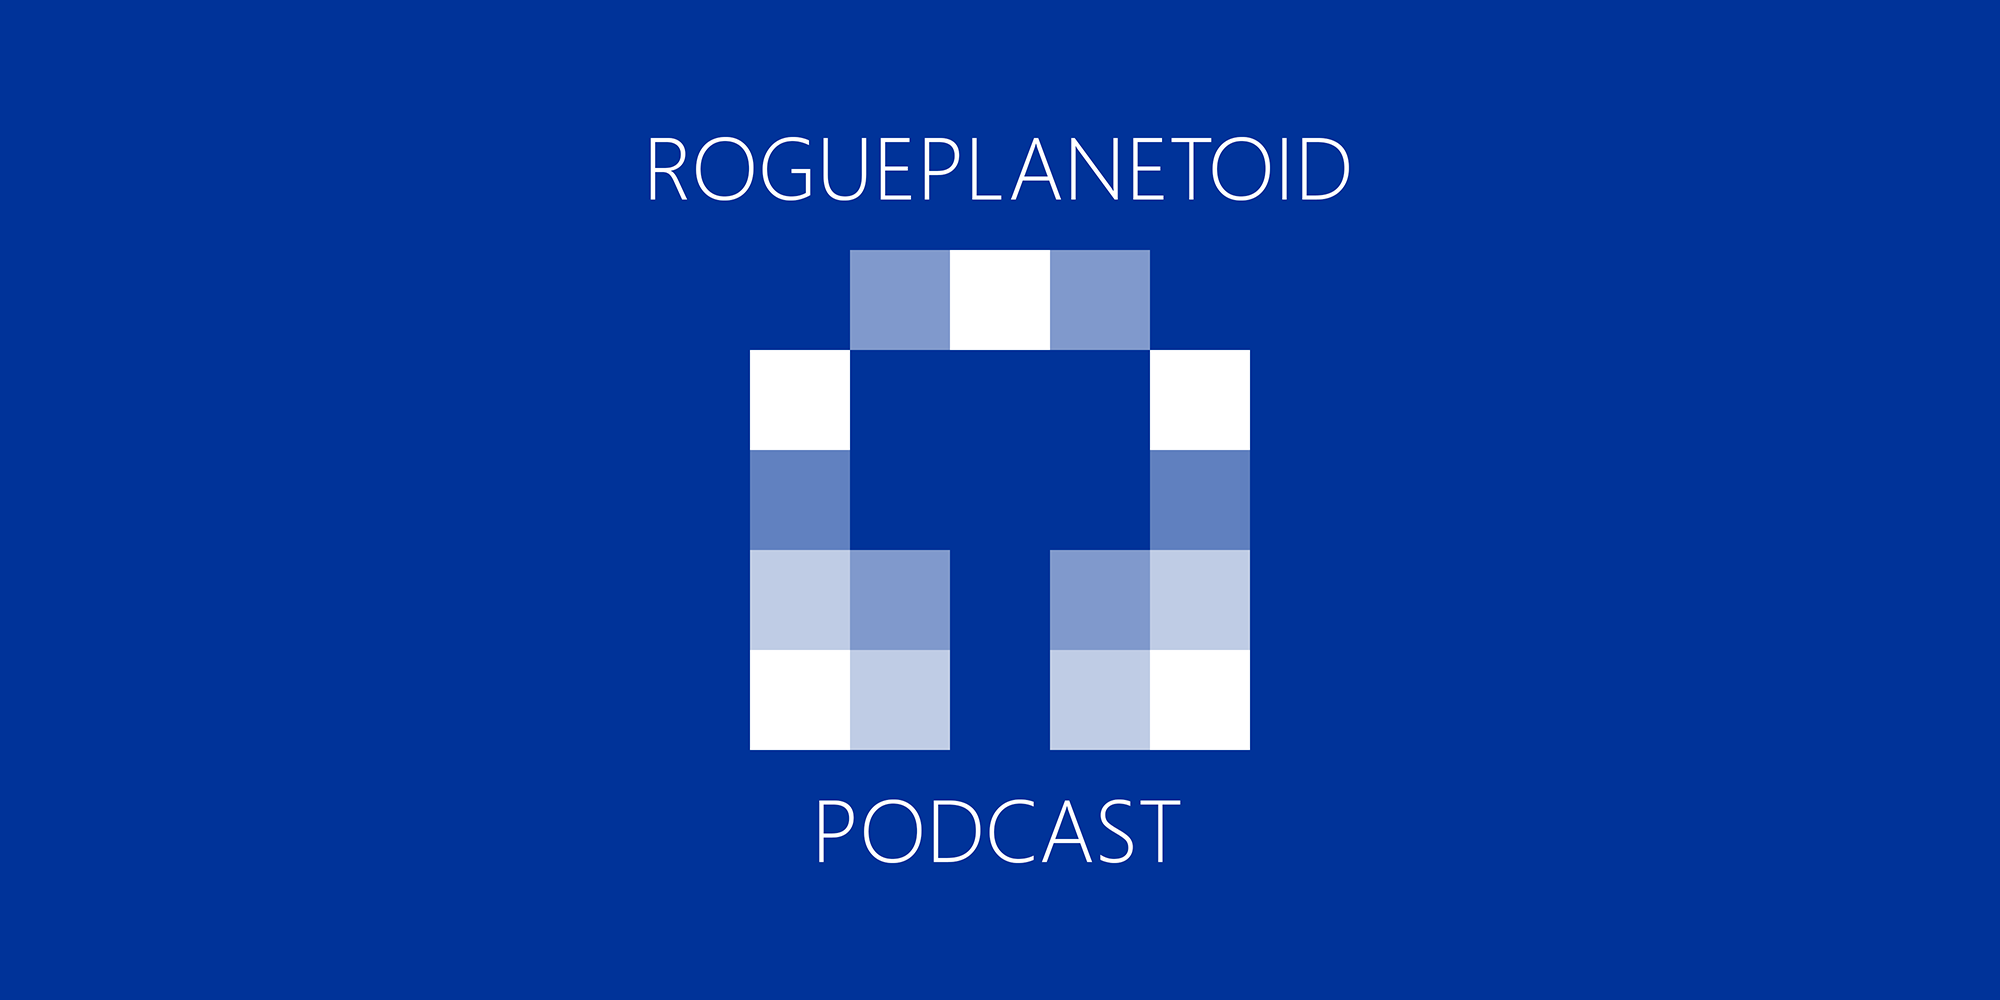 RoguePlanetoid Podcast - Episode Seven - Good and Bad Developers